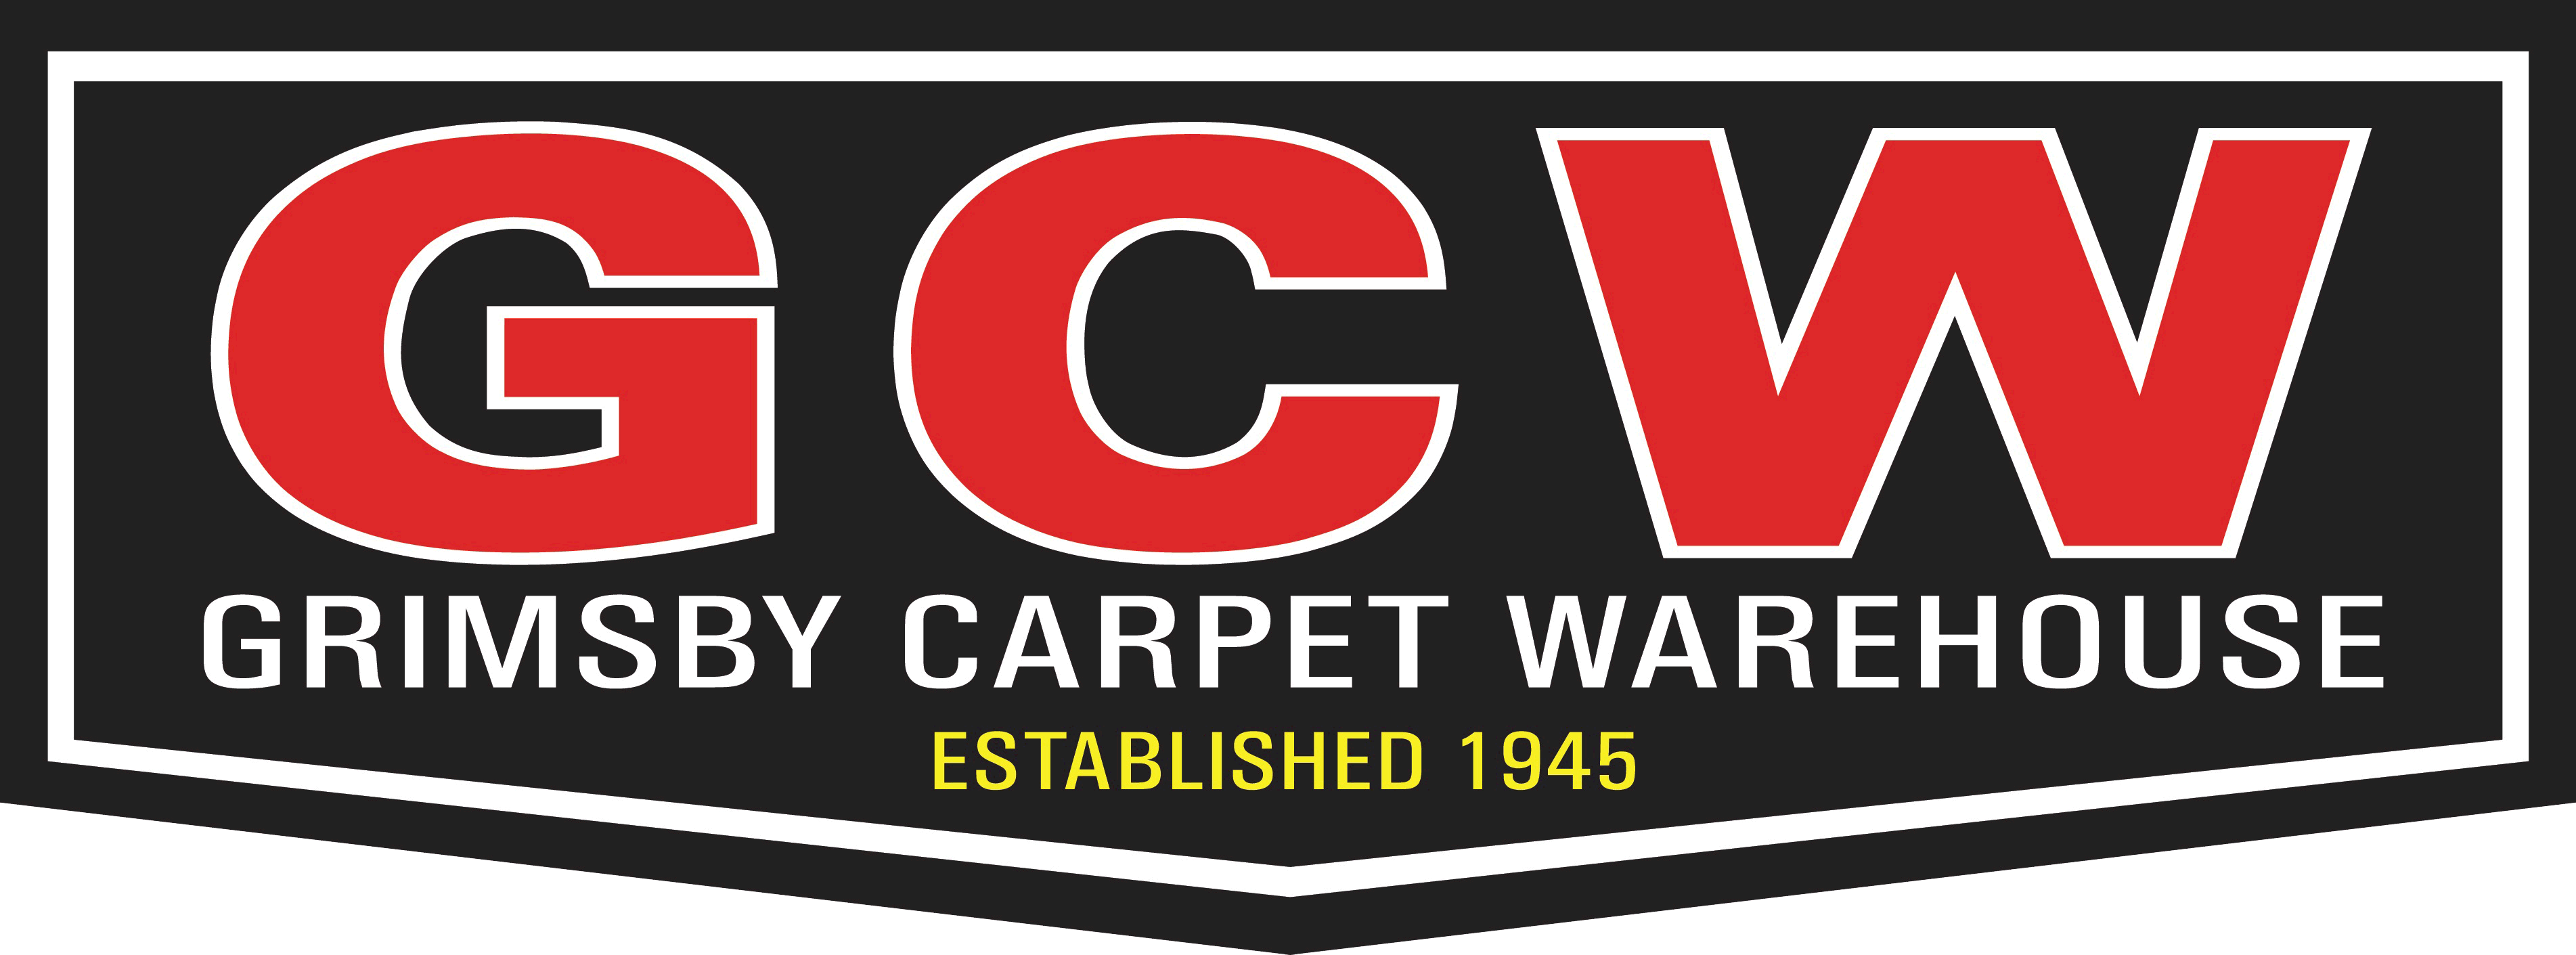 Gcw Logo - GRIMSBY CARPET WAREHOUSE No1 in Lincolnshire for quality flooring at ...